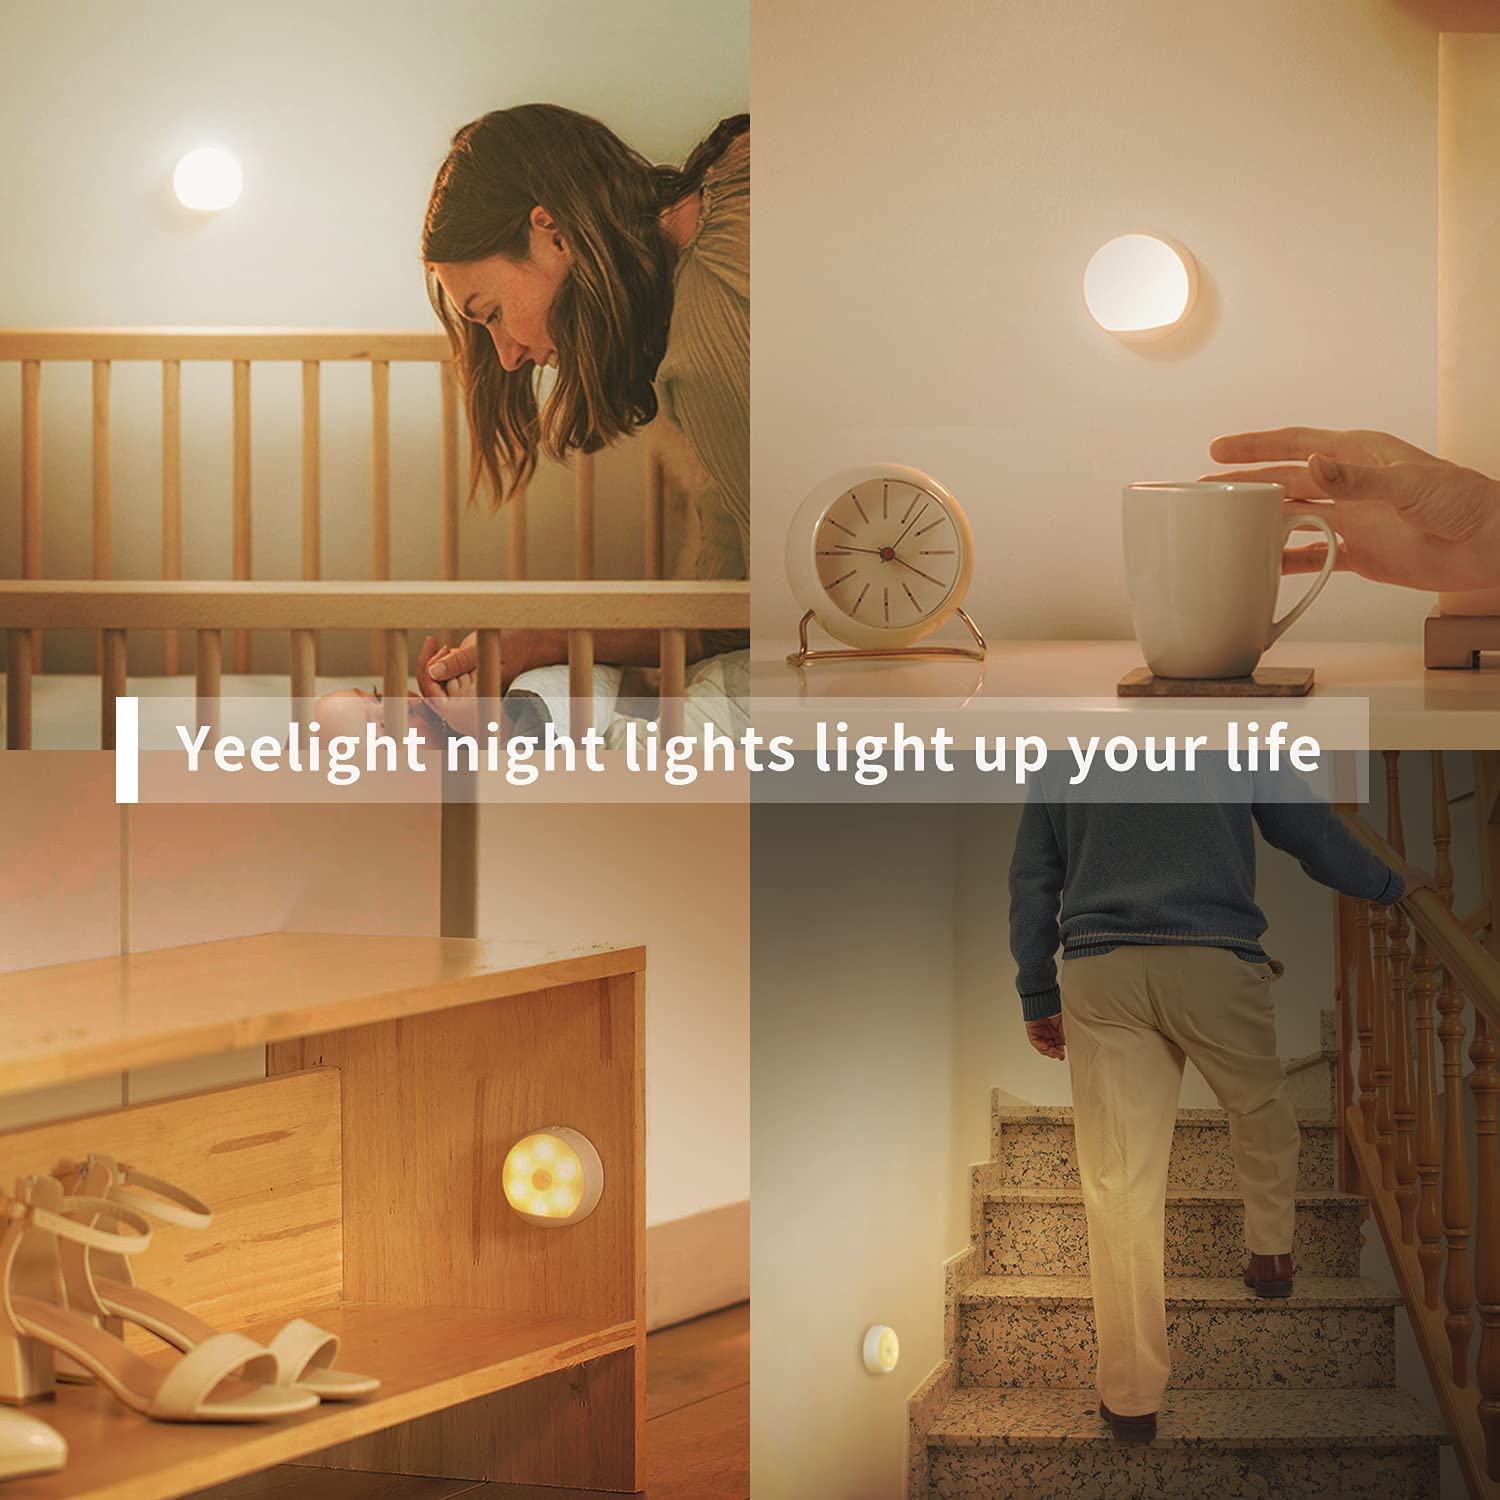 YEELIGHT YLYD01YL Rechargable Indoor Motion Sensor LED Night Light, Closet Magnetic Stick Hanging 3 Way Installation, 120 Day Use Per Charge, Lithium Battery Powered, 2700K Warm White